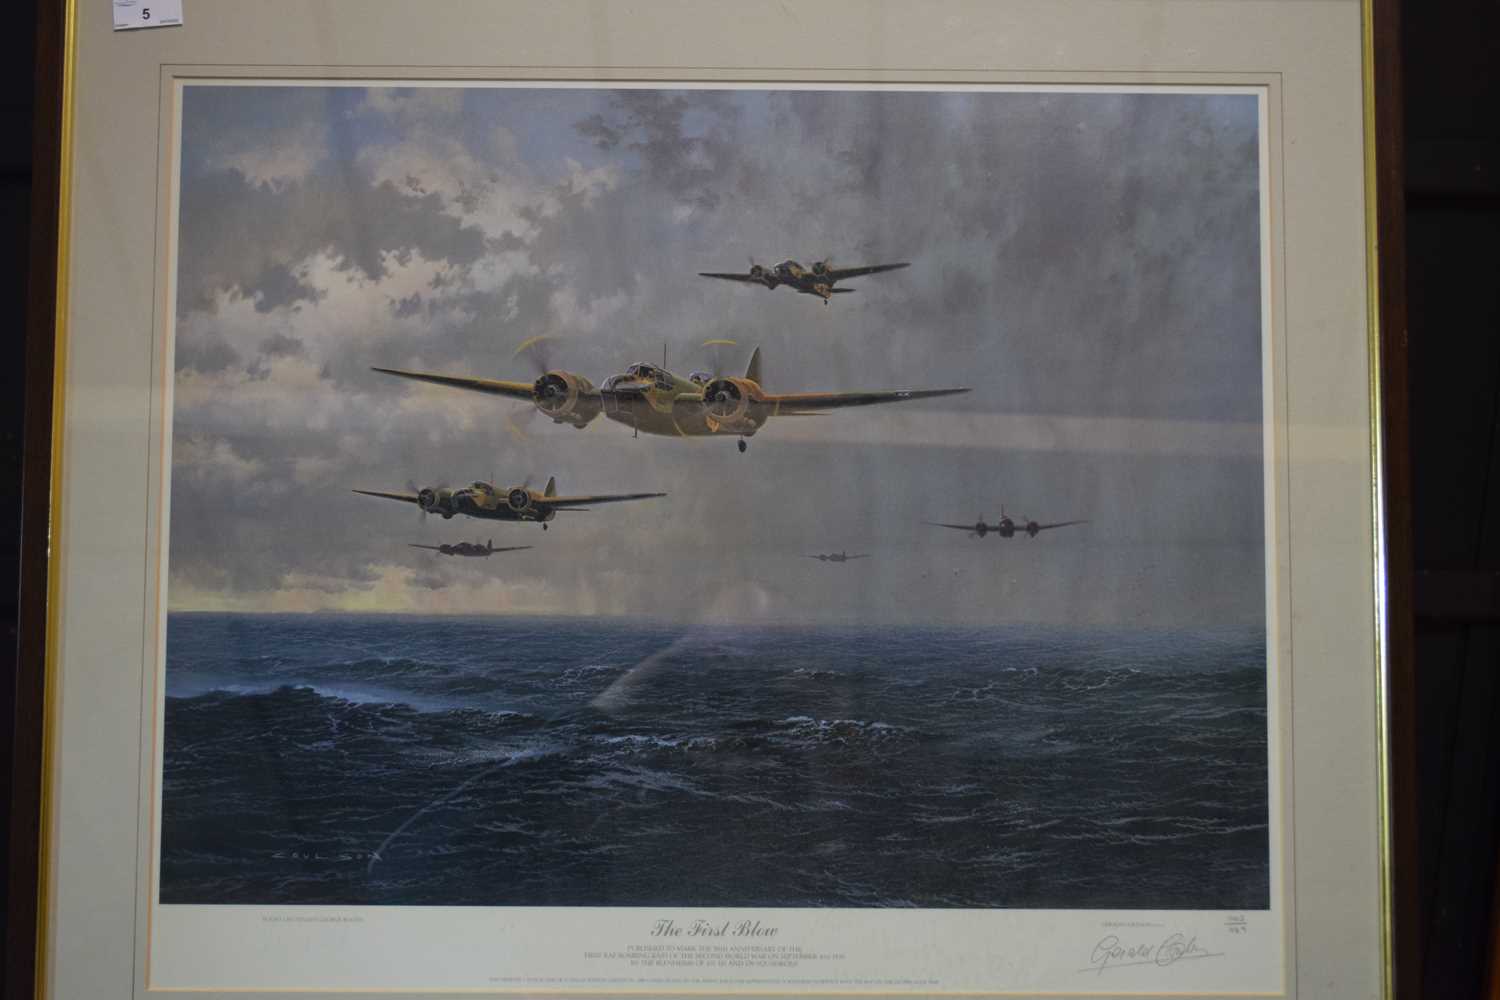 Gerald Coulson 'The First Blow' print of Blenheim Bombers published to mark the 50th anniversary - Image 2 of 3